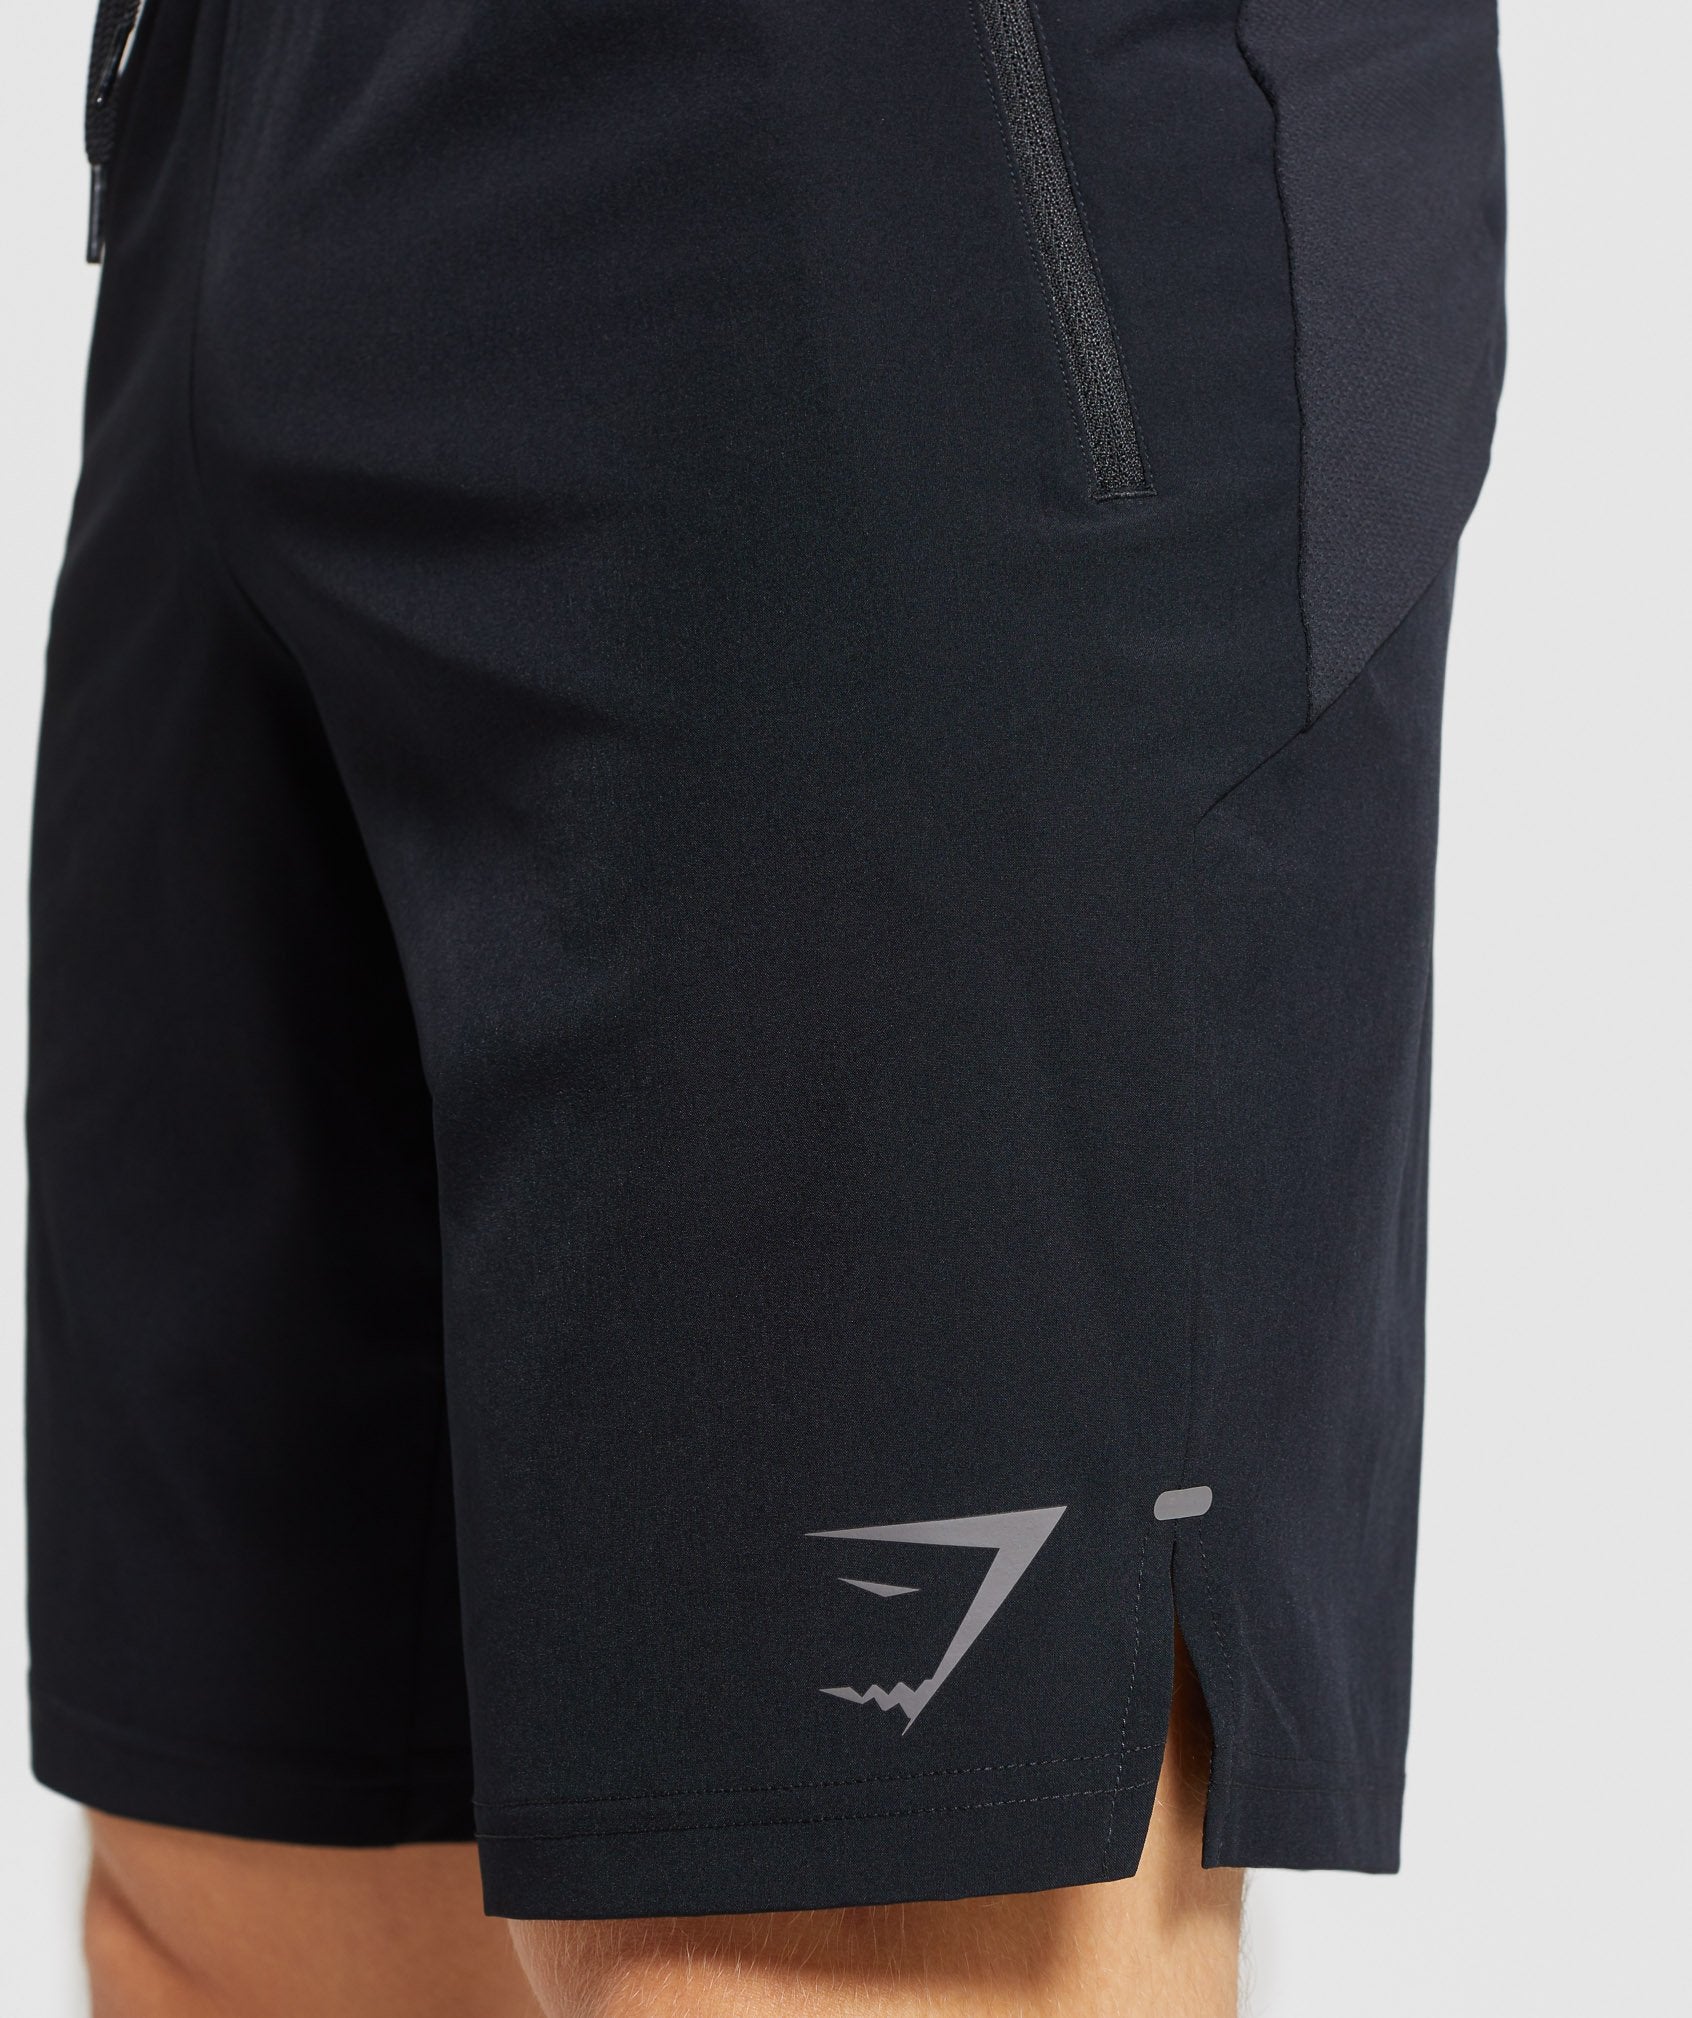 Element Hiit 9" Shorts in Black - view 5